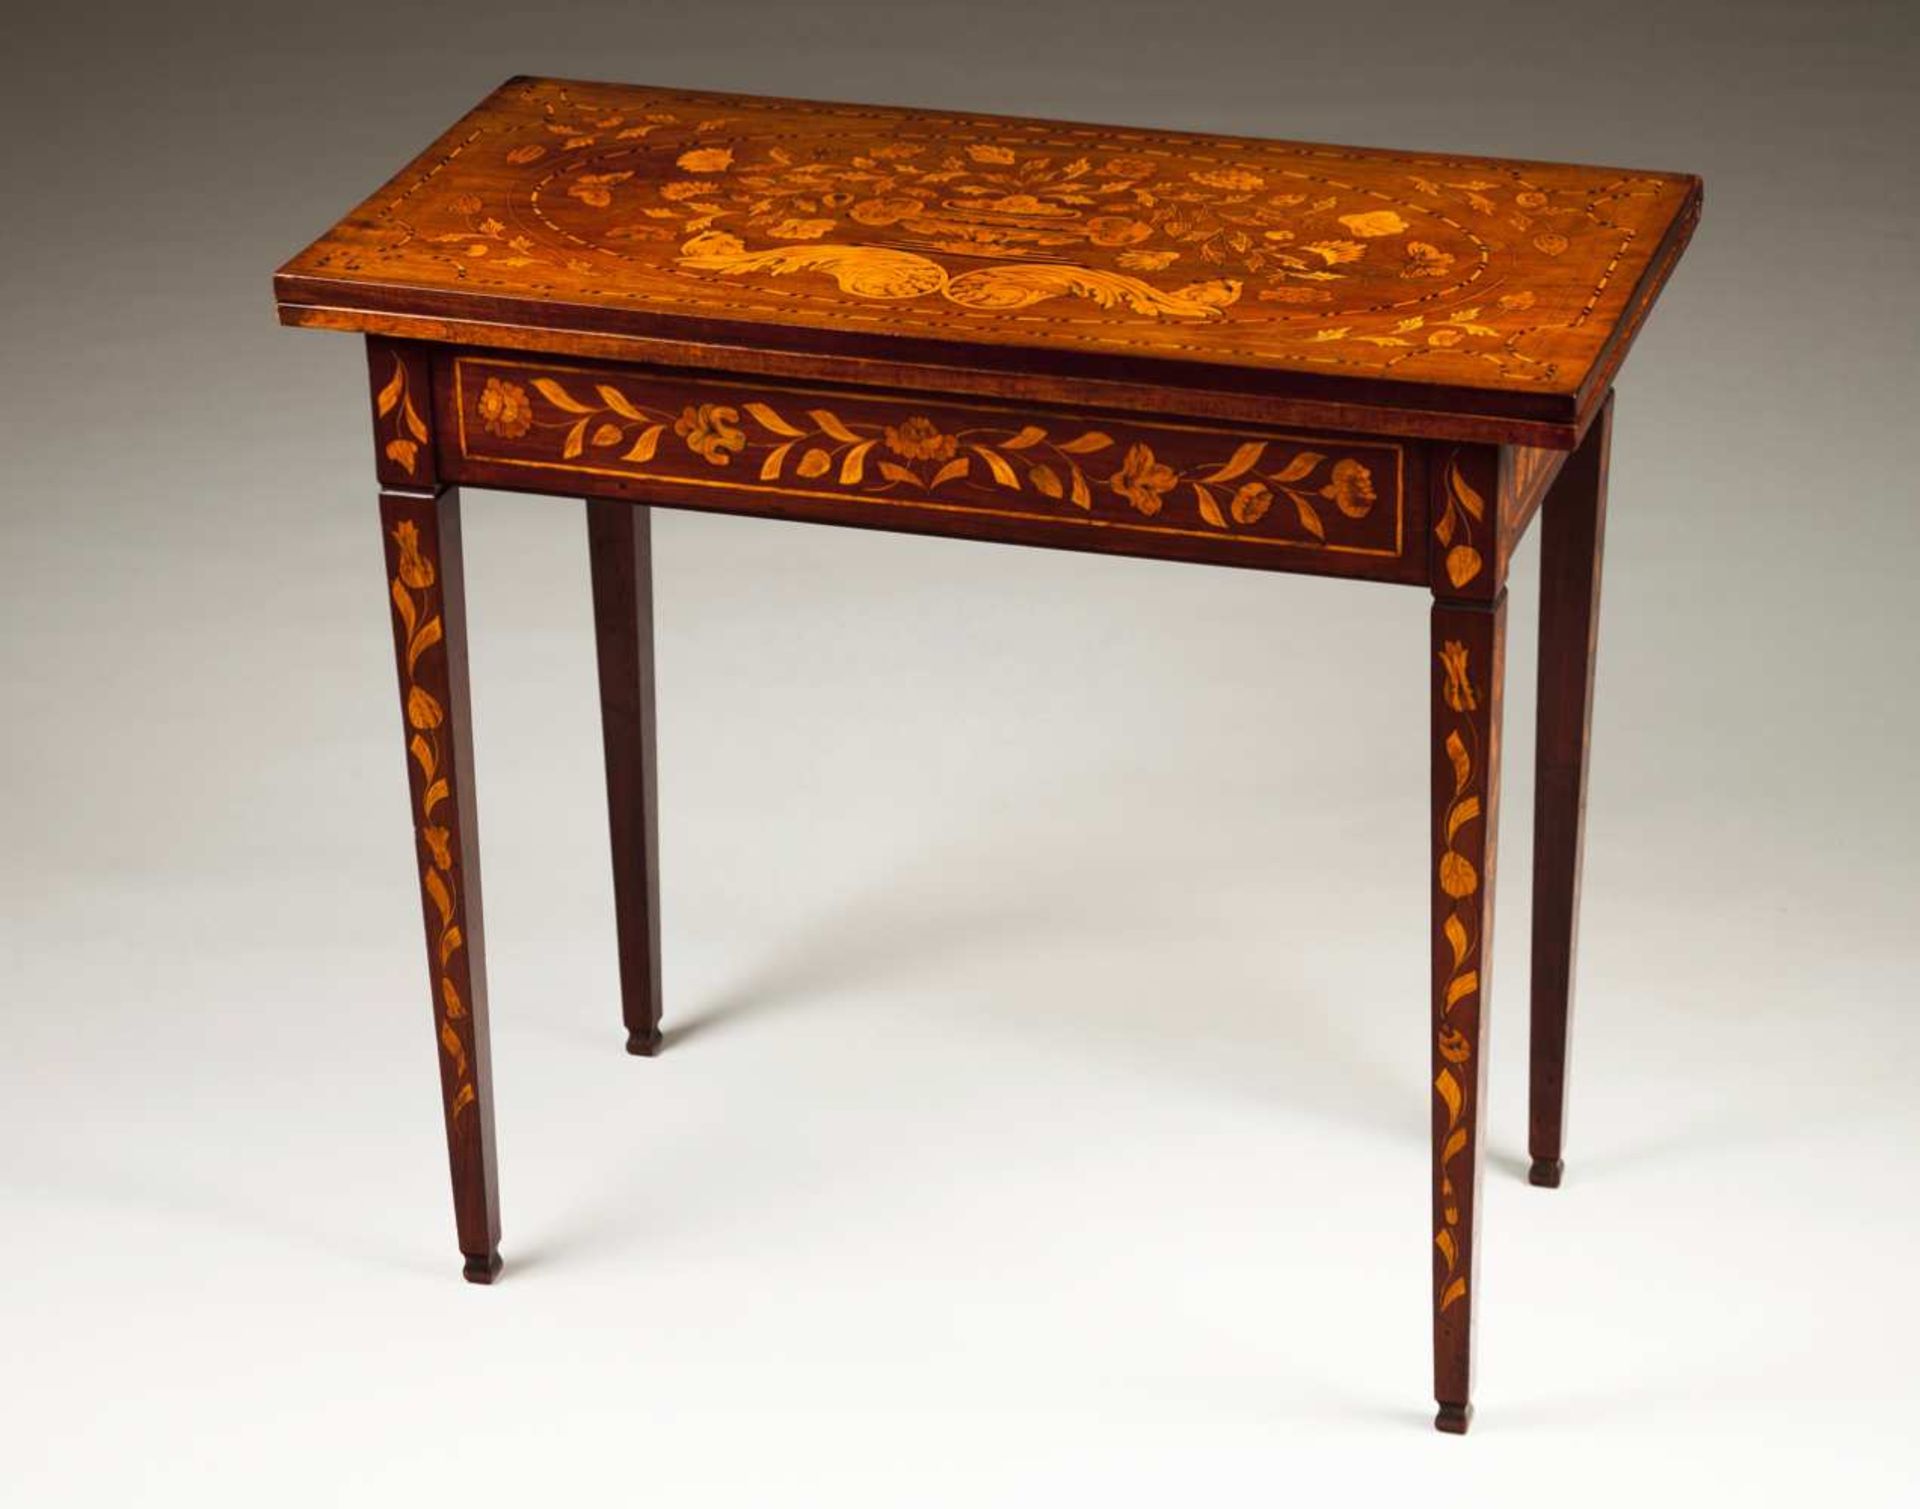 A Dutch tea table Rosewood with rich rosewood, satinwood and other woods marquetry decoration